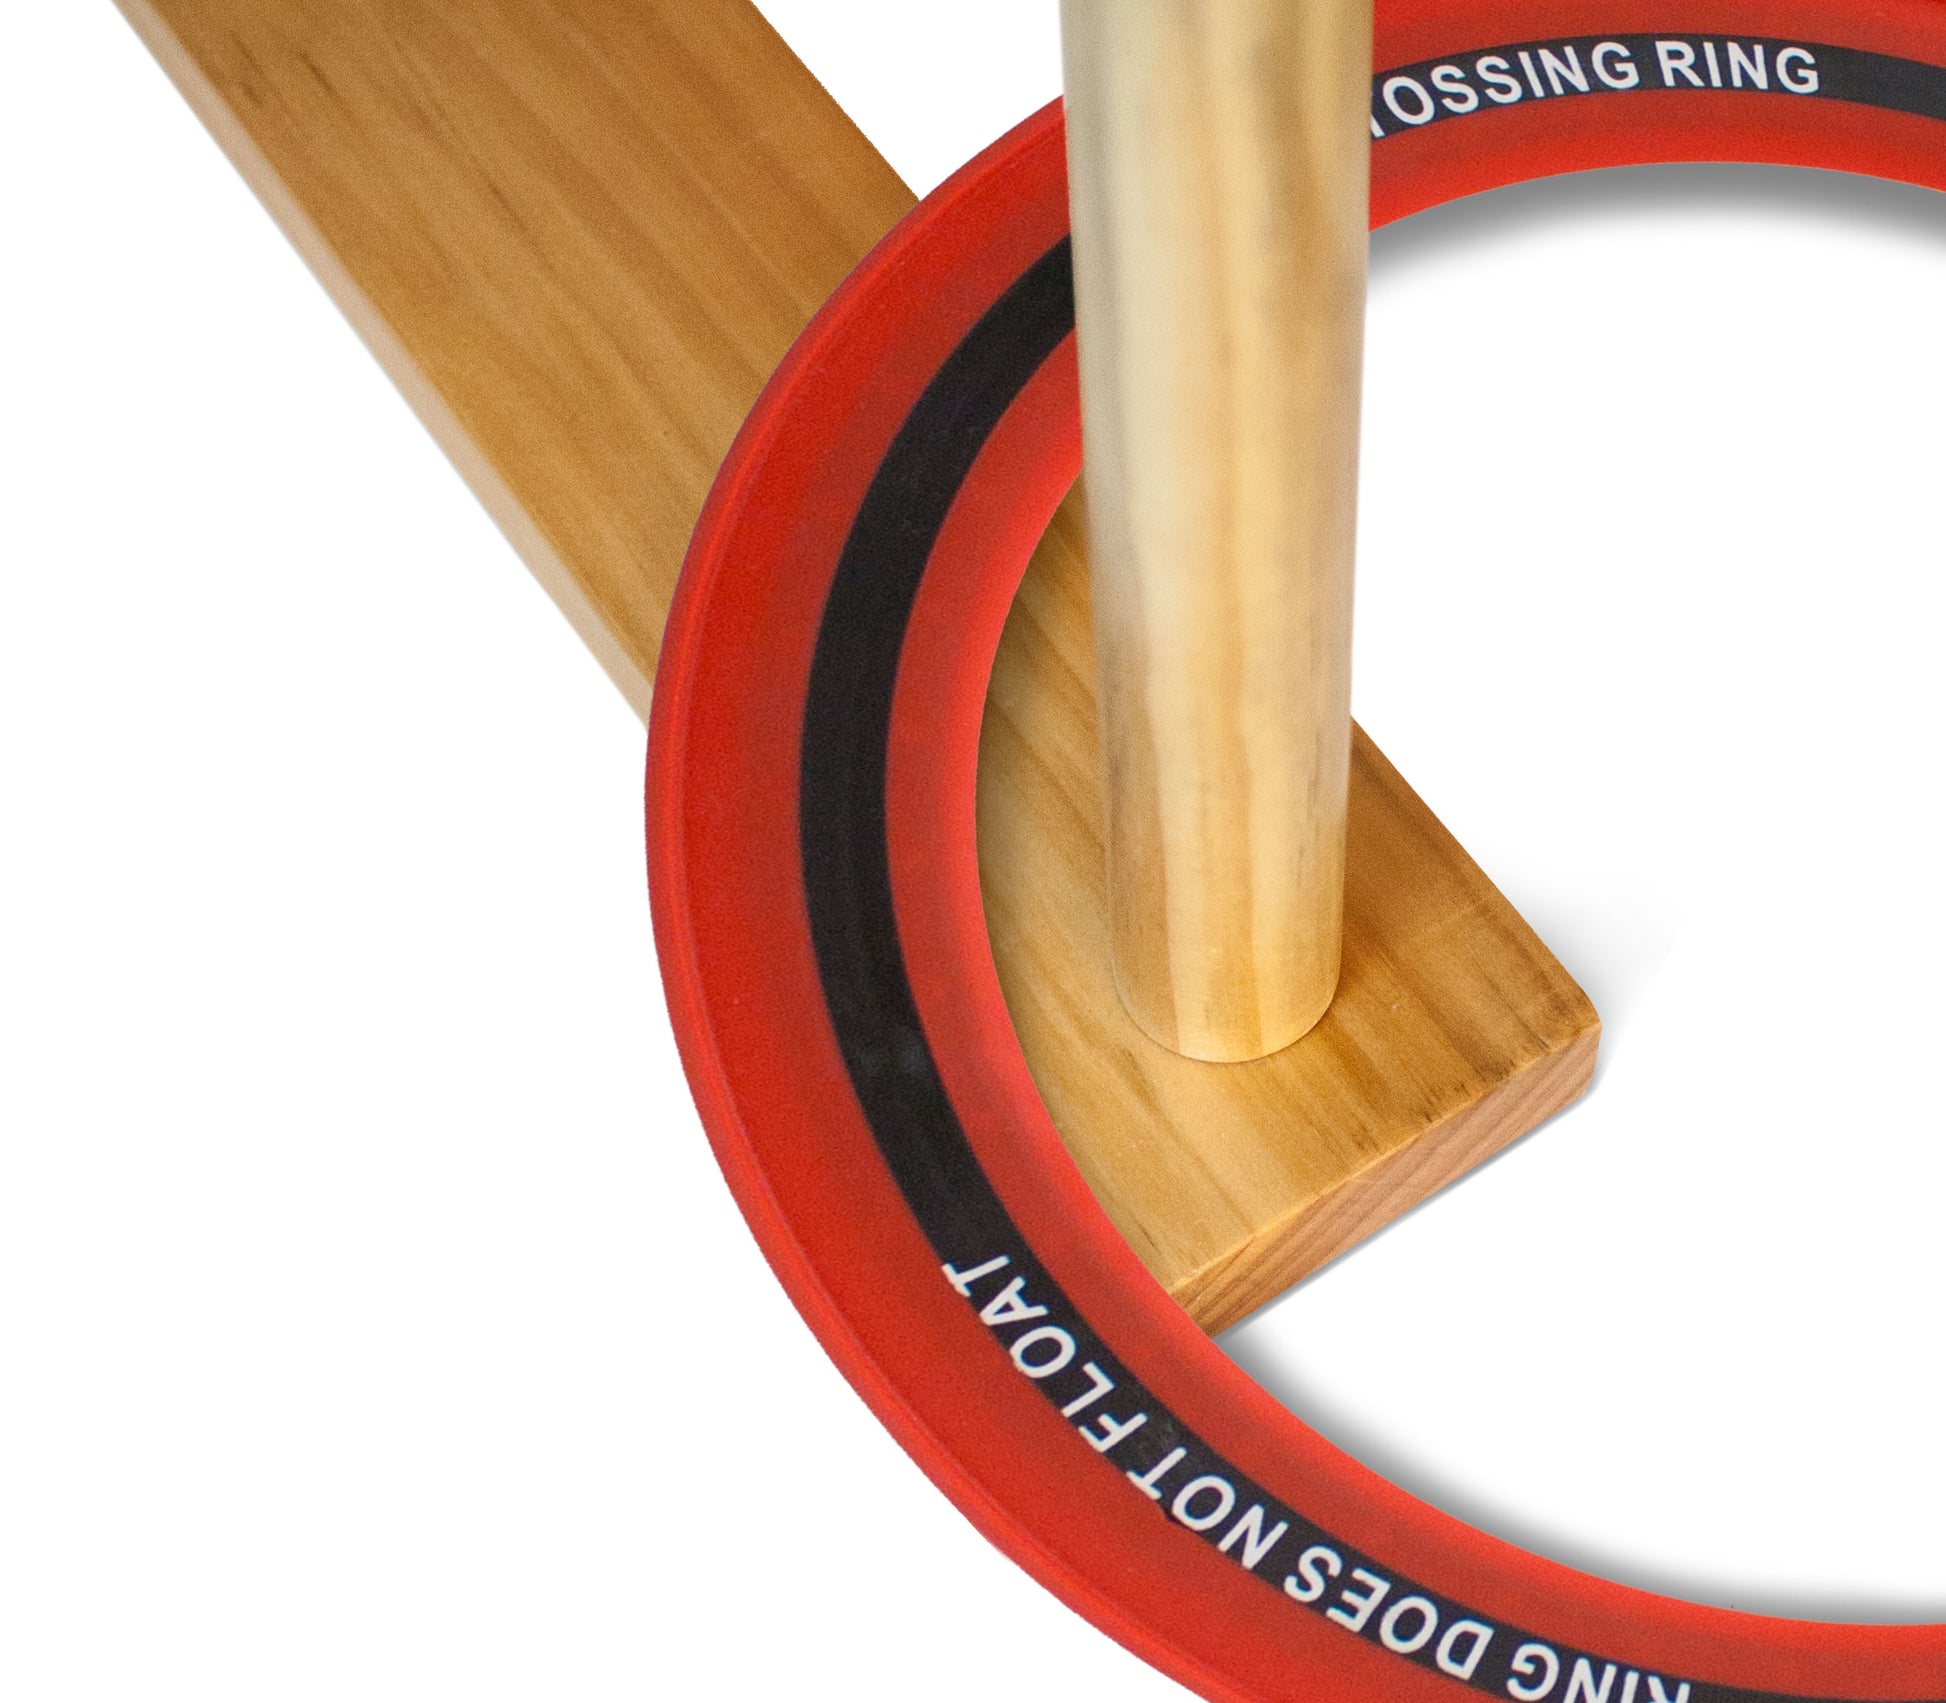 Yard Games Outdoor Giant Wooden Ring Toss Lawn Game w/ Soft Touch Throwing Rings